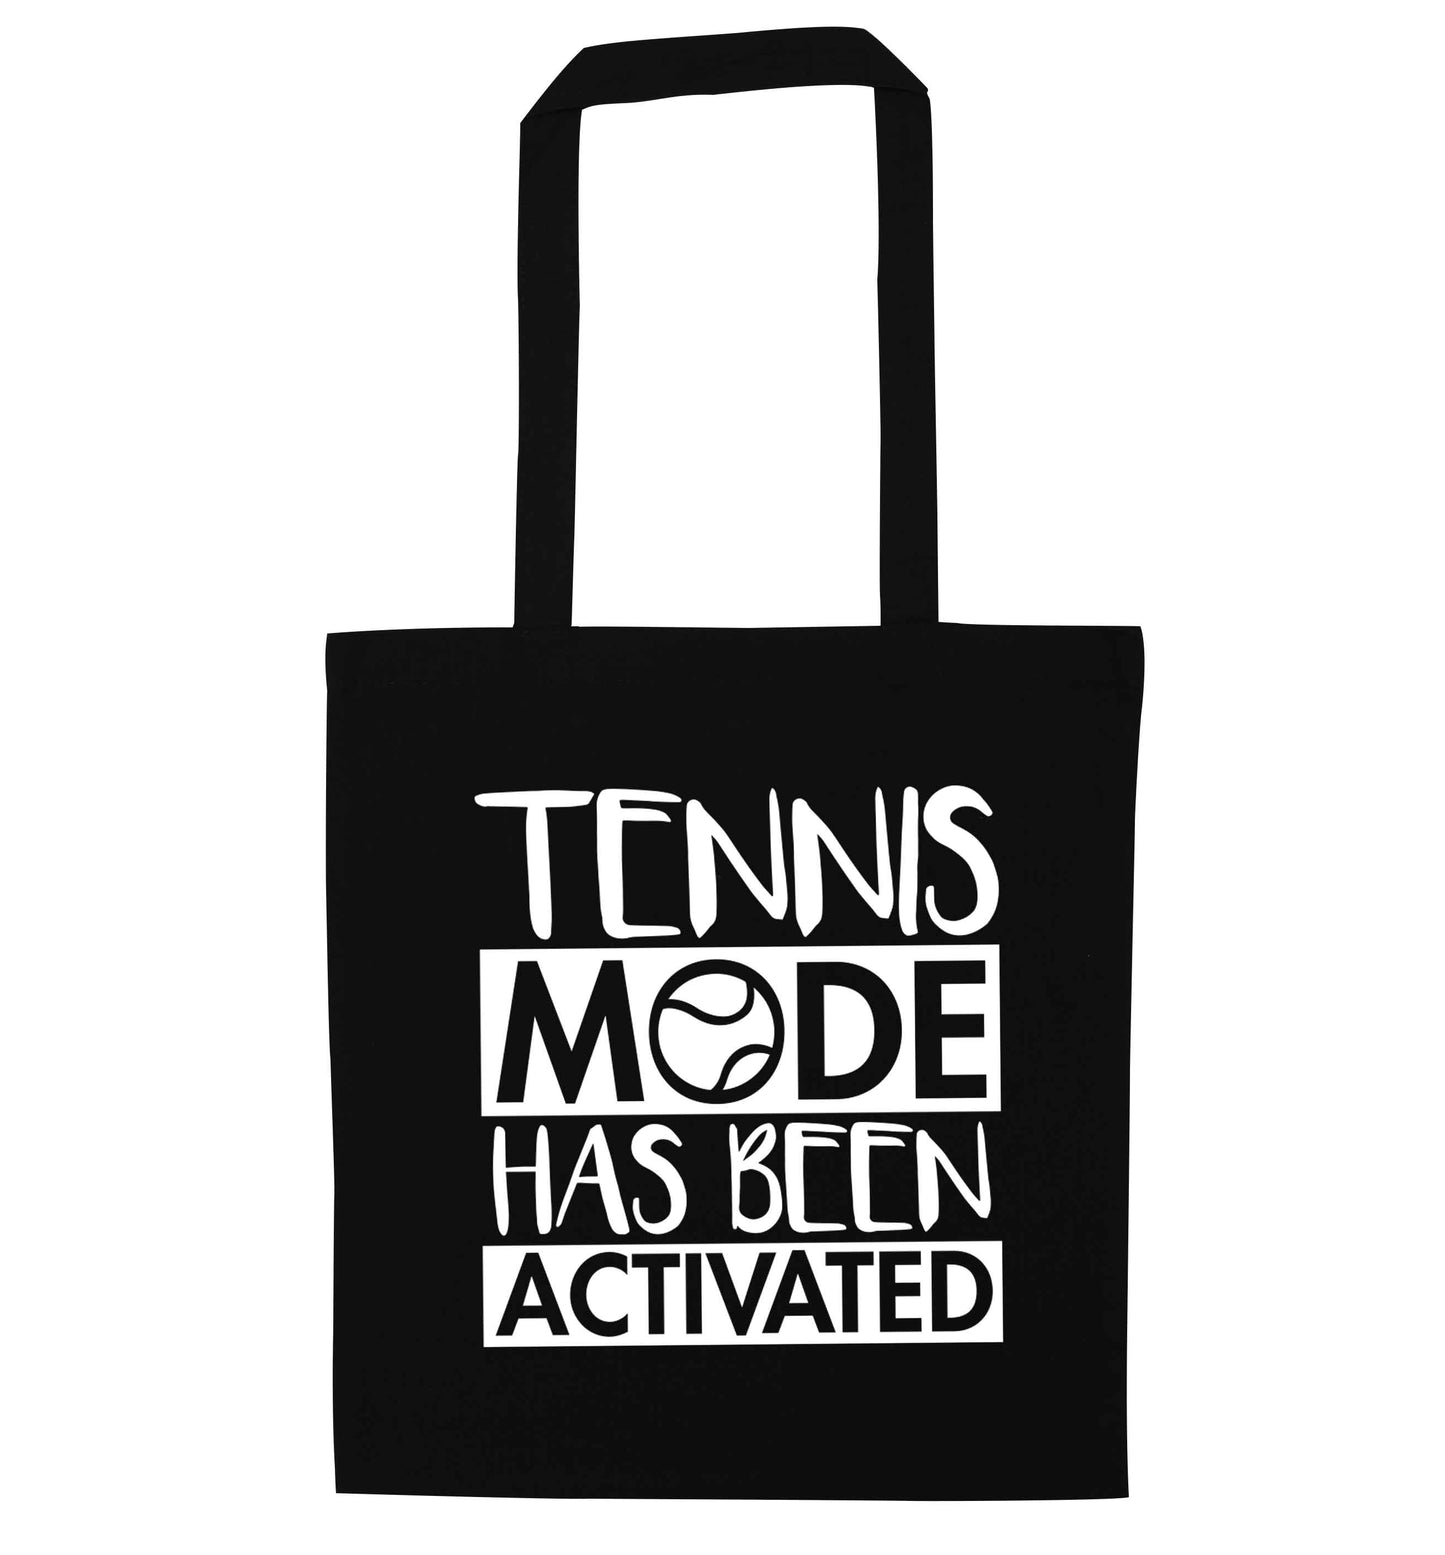 Tennis mode has been activated black tote bag